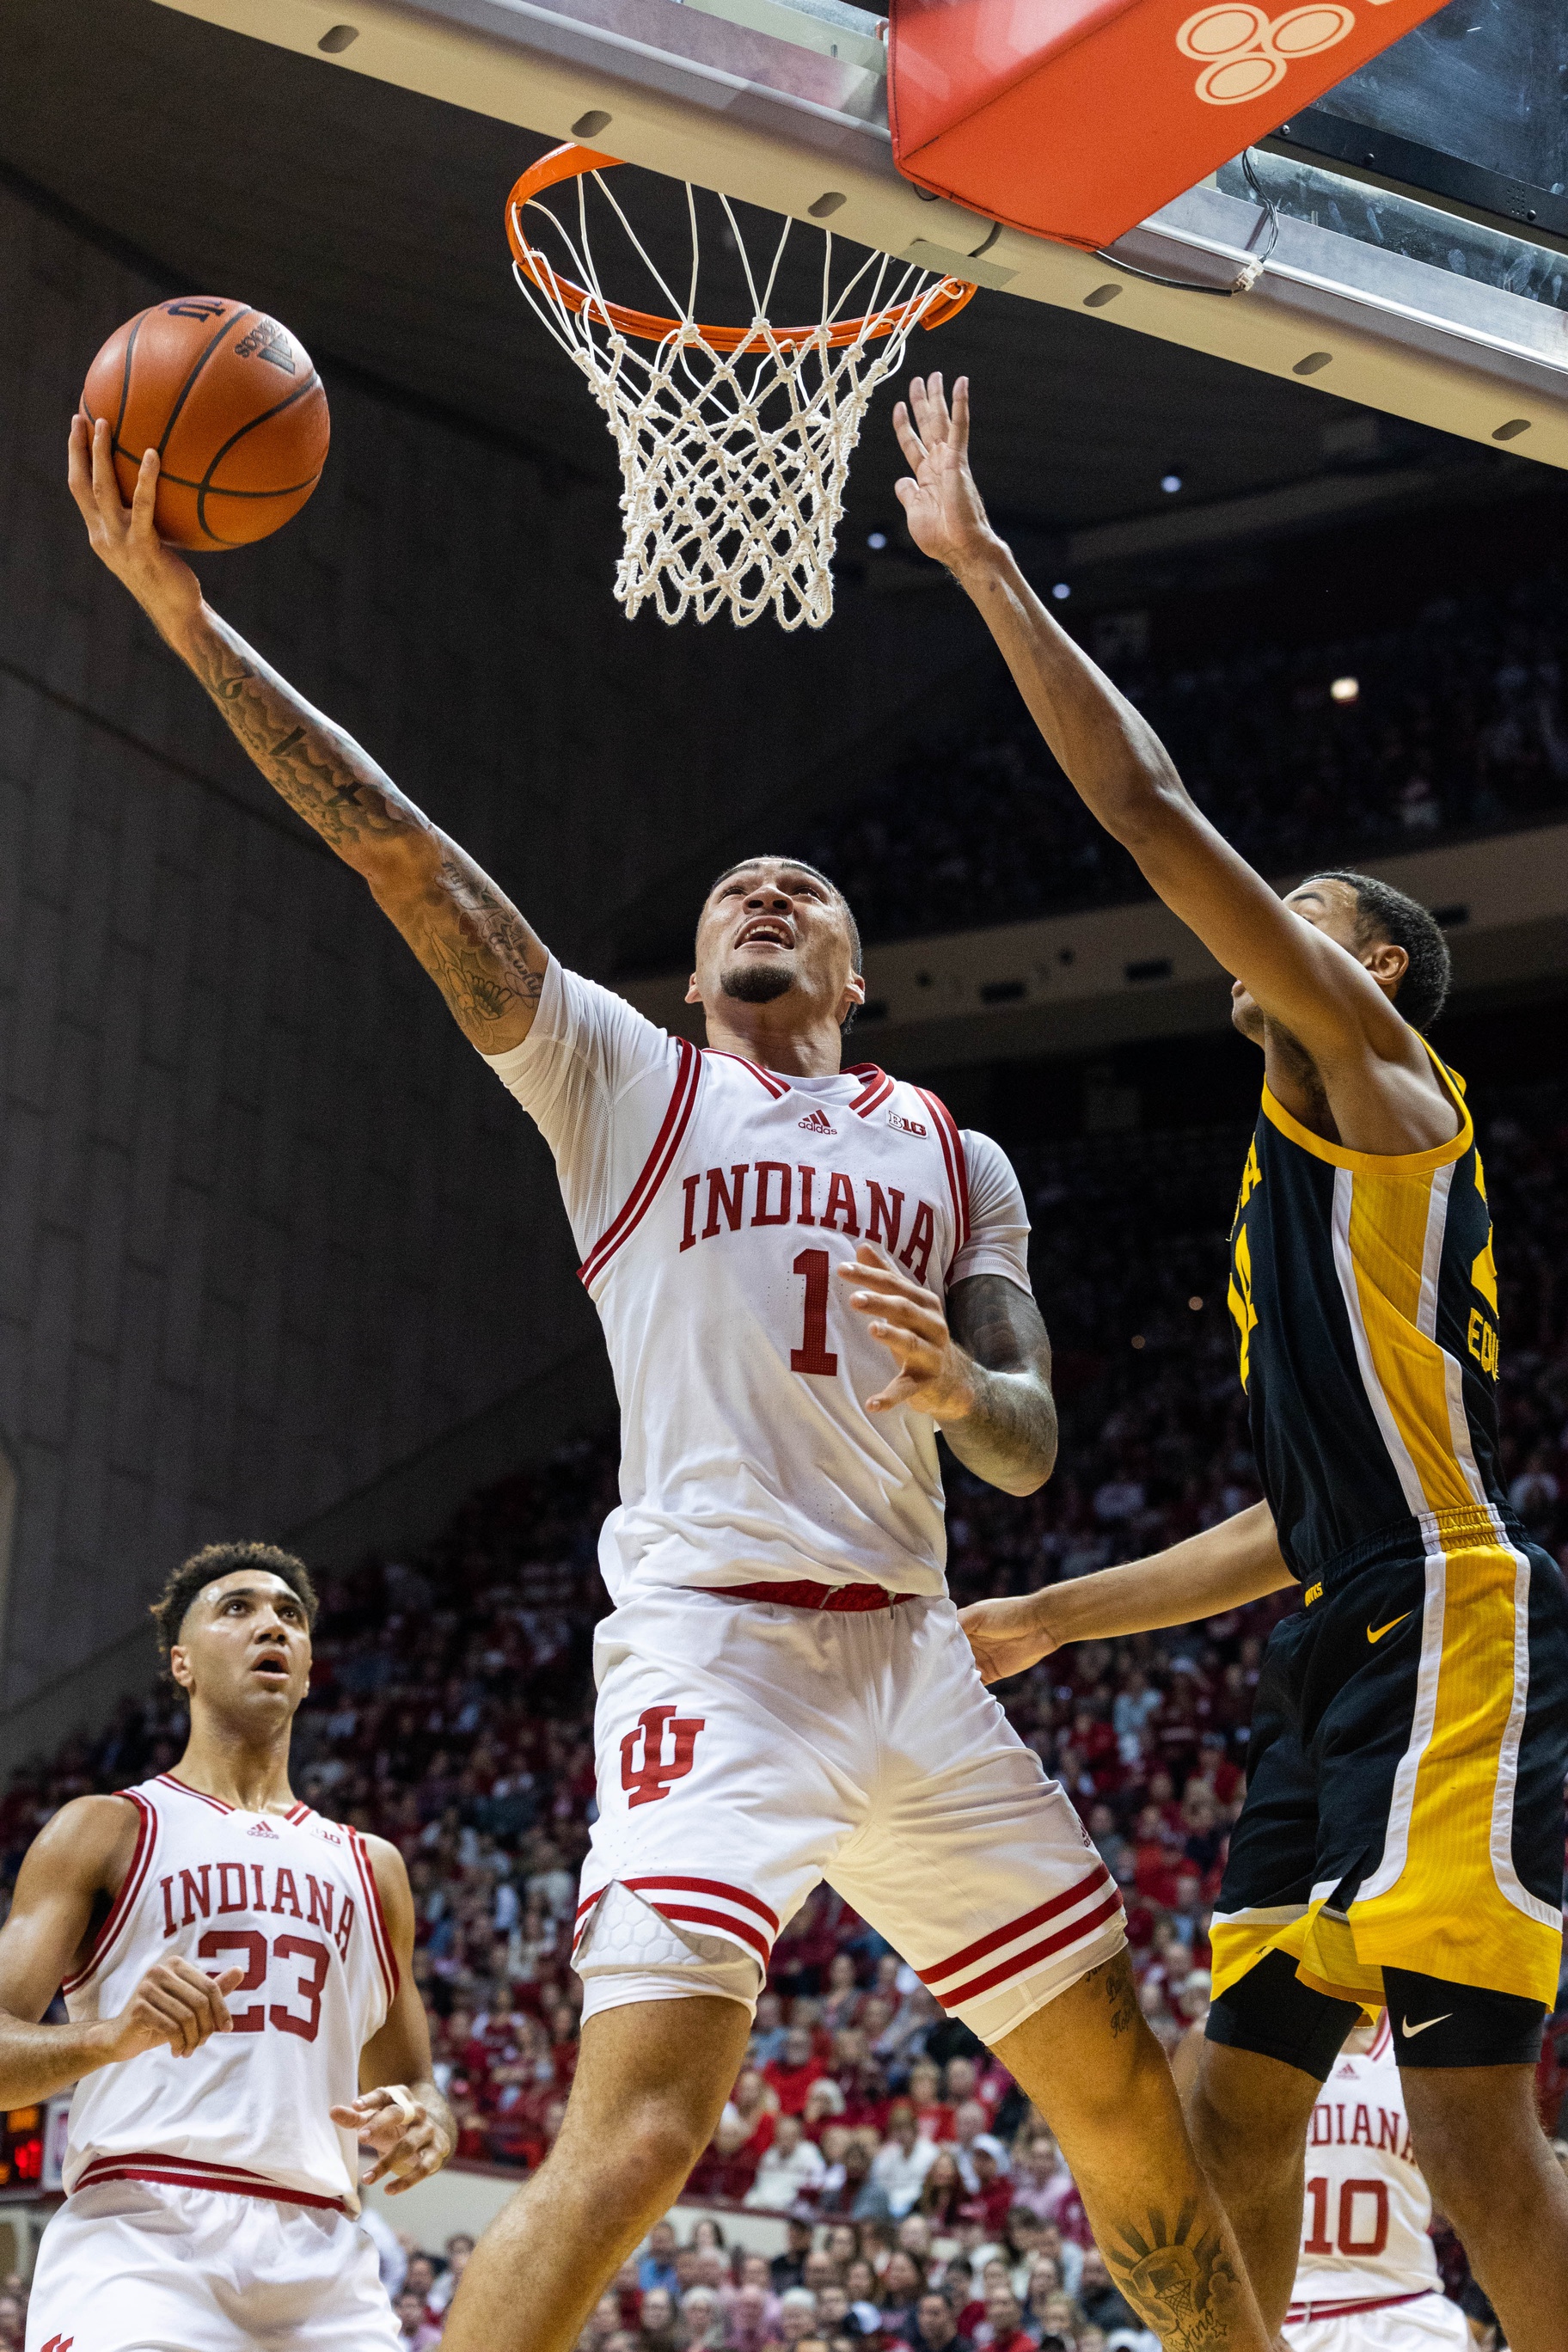 Indiana Hoosiers guard Jalen Hood-Schifino (1) shoots the ball while Iowa Hawkeyes forward Kris Murray (24) defends in the first half at Simon Skjodt Assembly Hall.